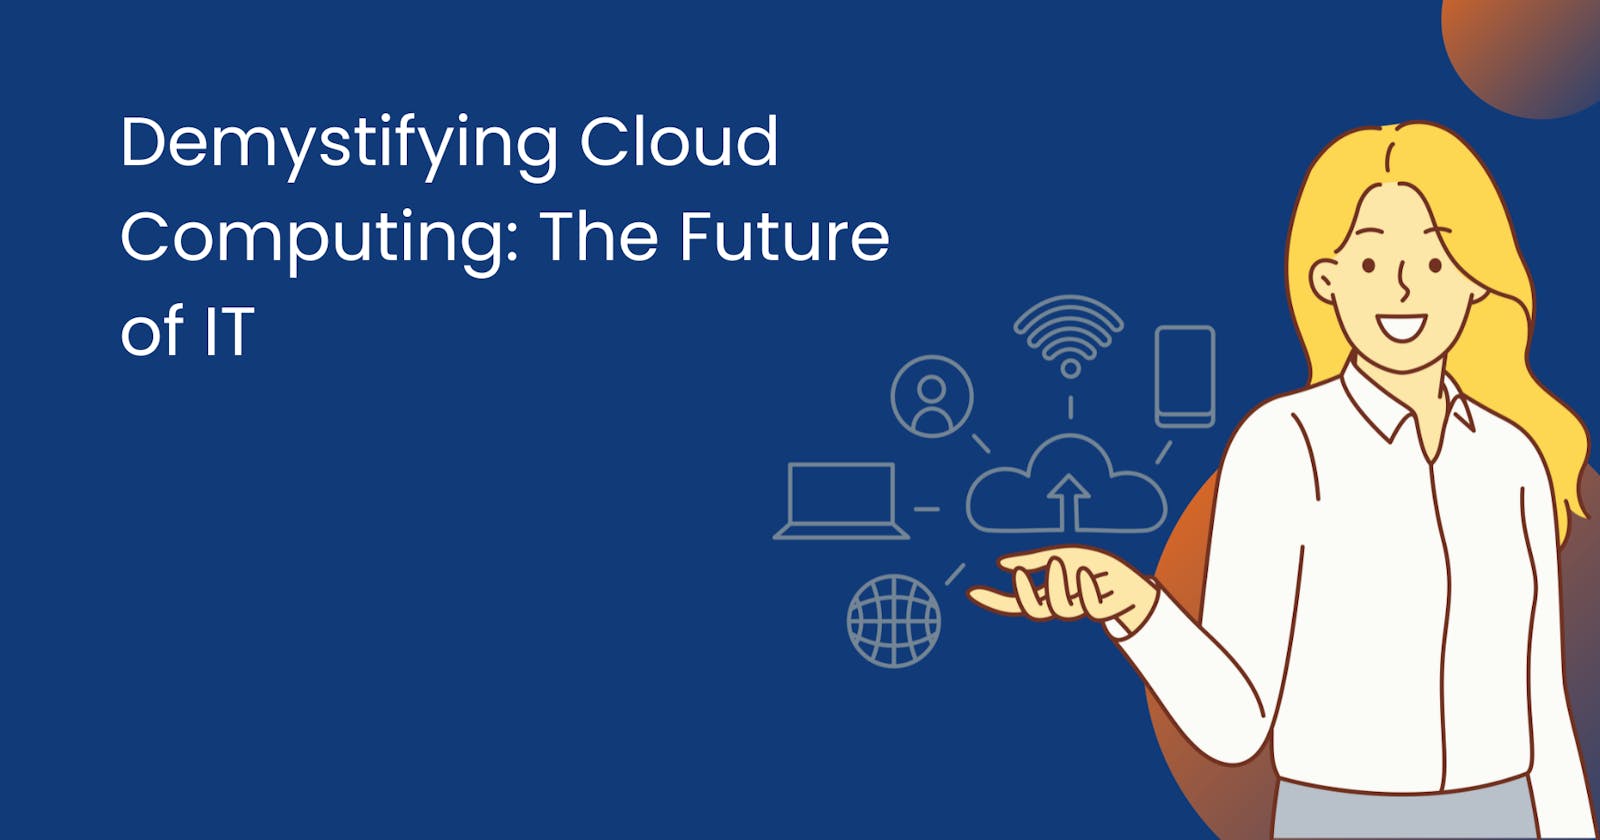 Demystifying Cloud Computing: The Future of IT